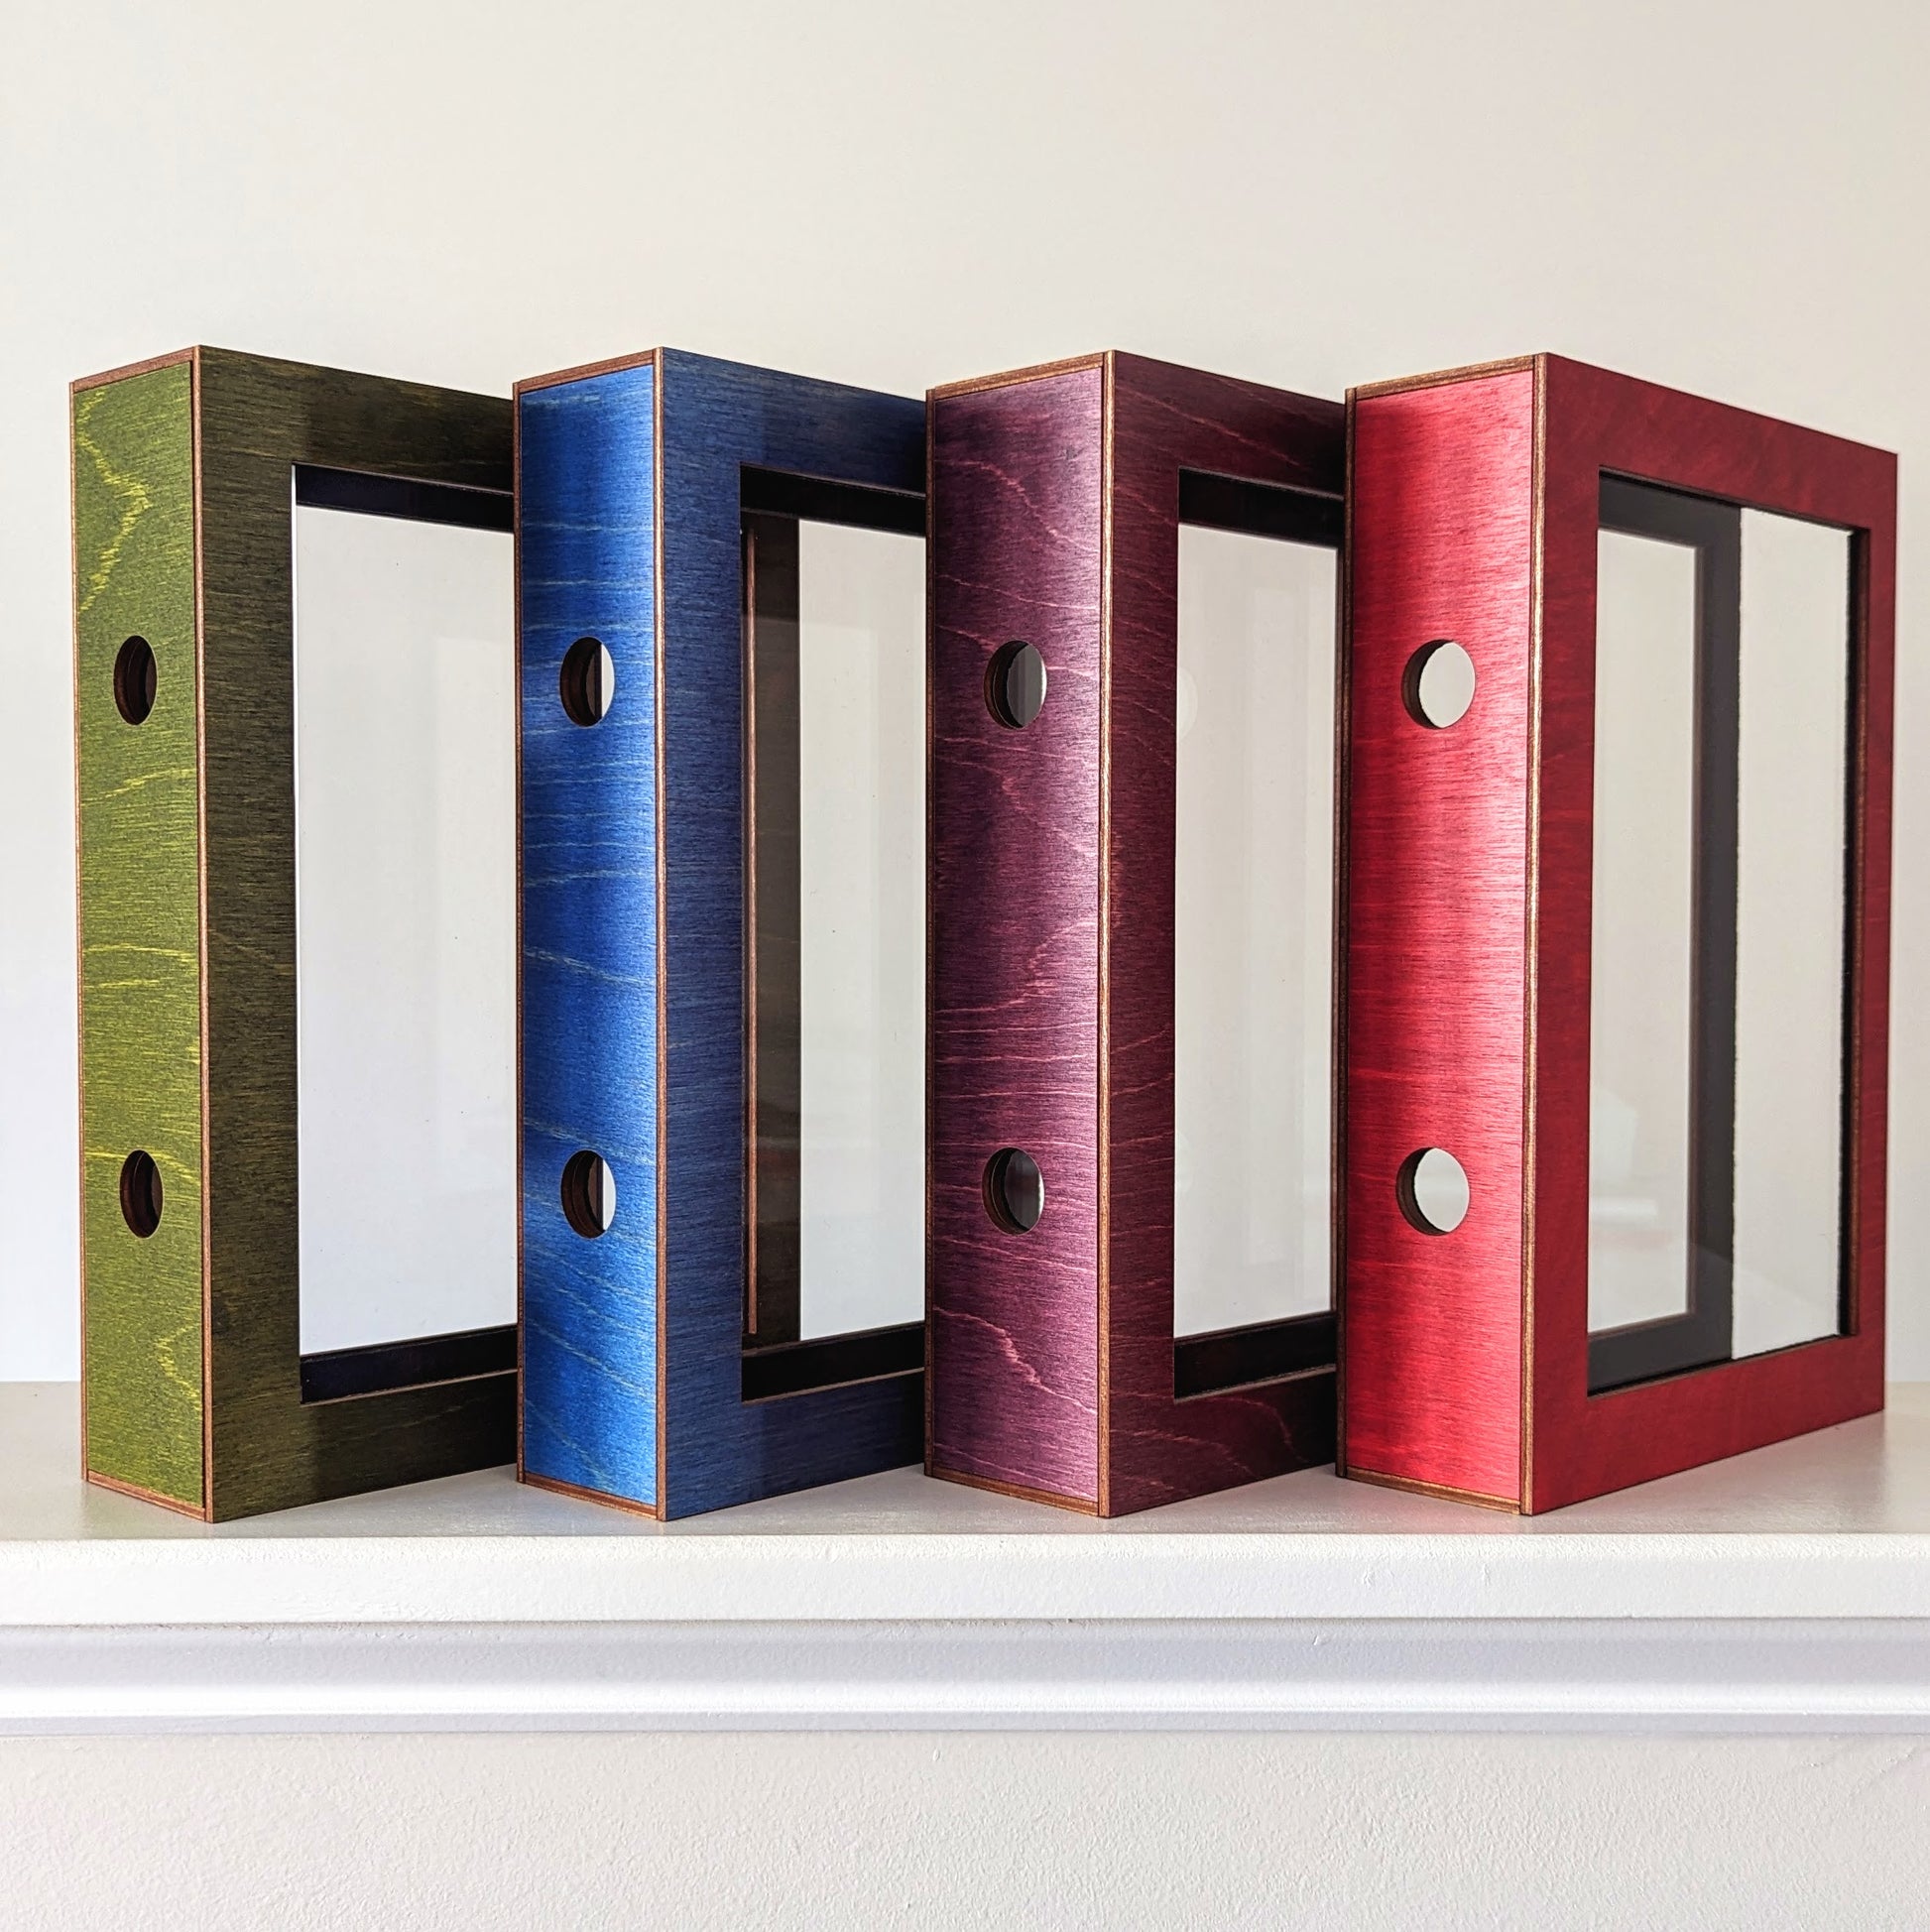 book display case for collectible books like leatherbounds from brandon sanderson and lord of the rings